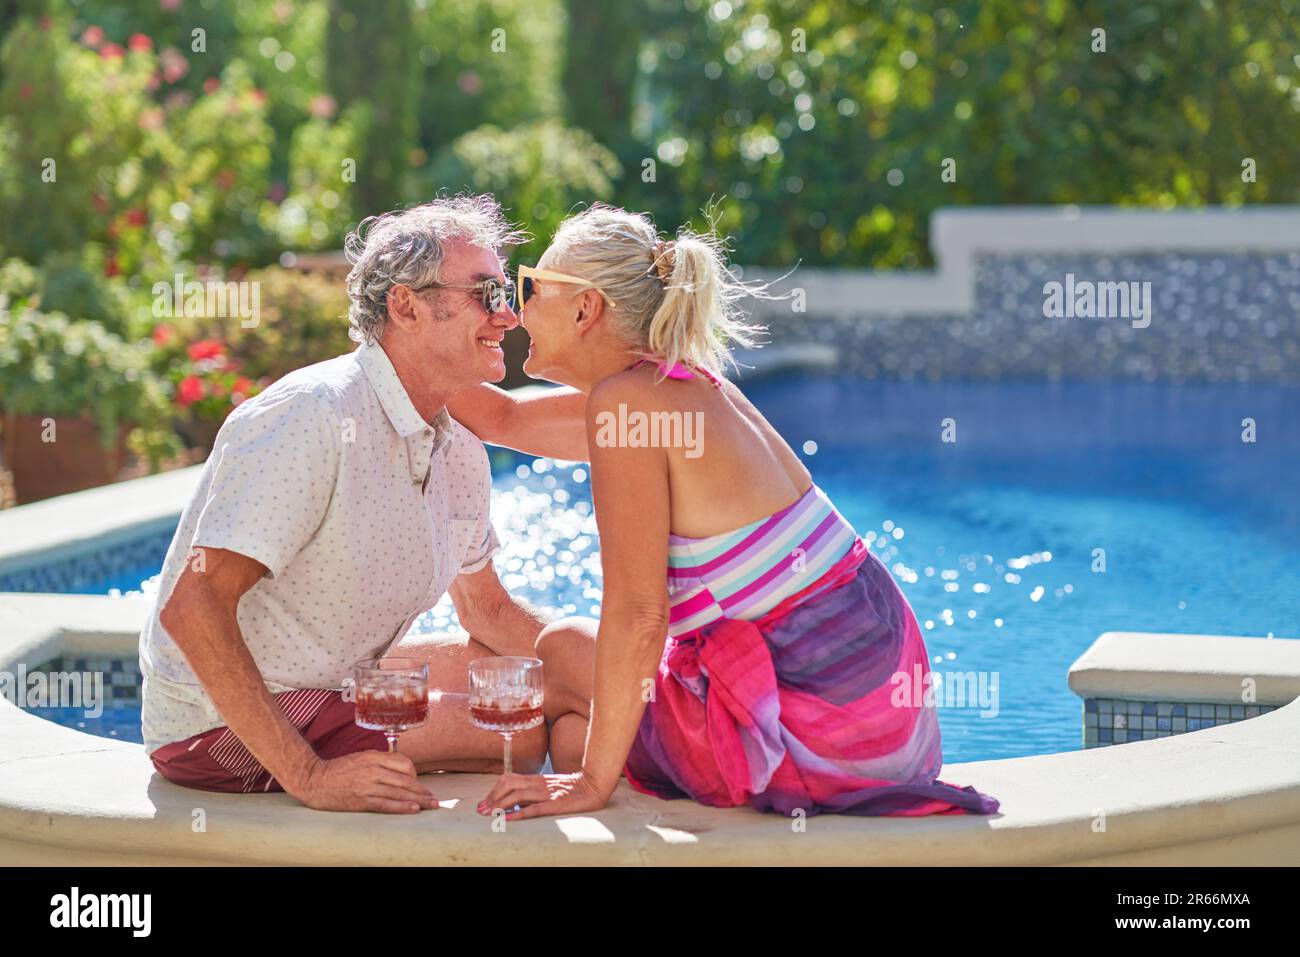 Happy, affectionate senior couple kissing and drinking at swimming pool Stock Photo